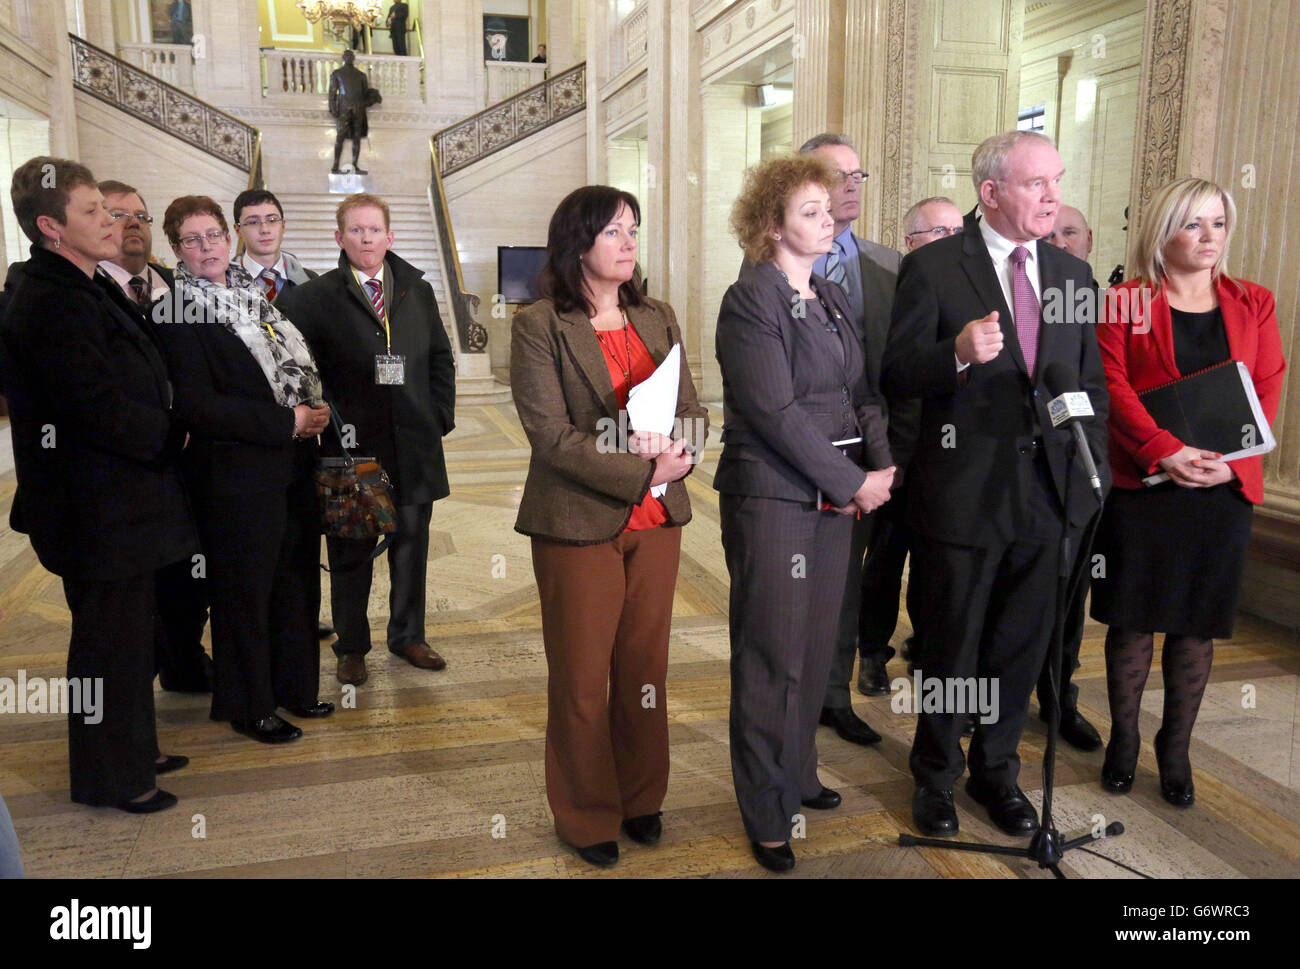 Victims' families listen to Martin McGuinness and his Sinn Fein party colleagues speaking to the media, after the Northern Ireland Assembly was recalled to debate the recent letter crisis. Stock Photo